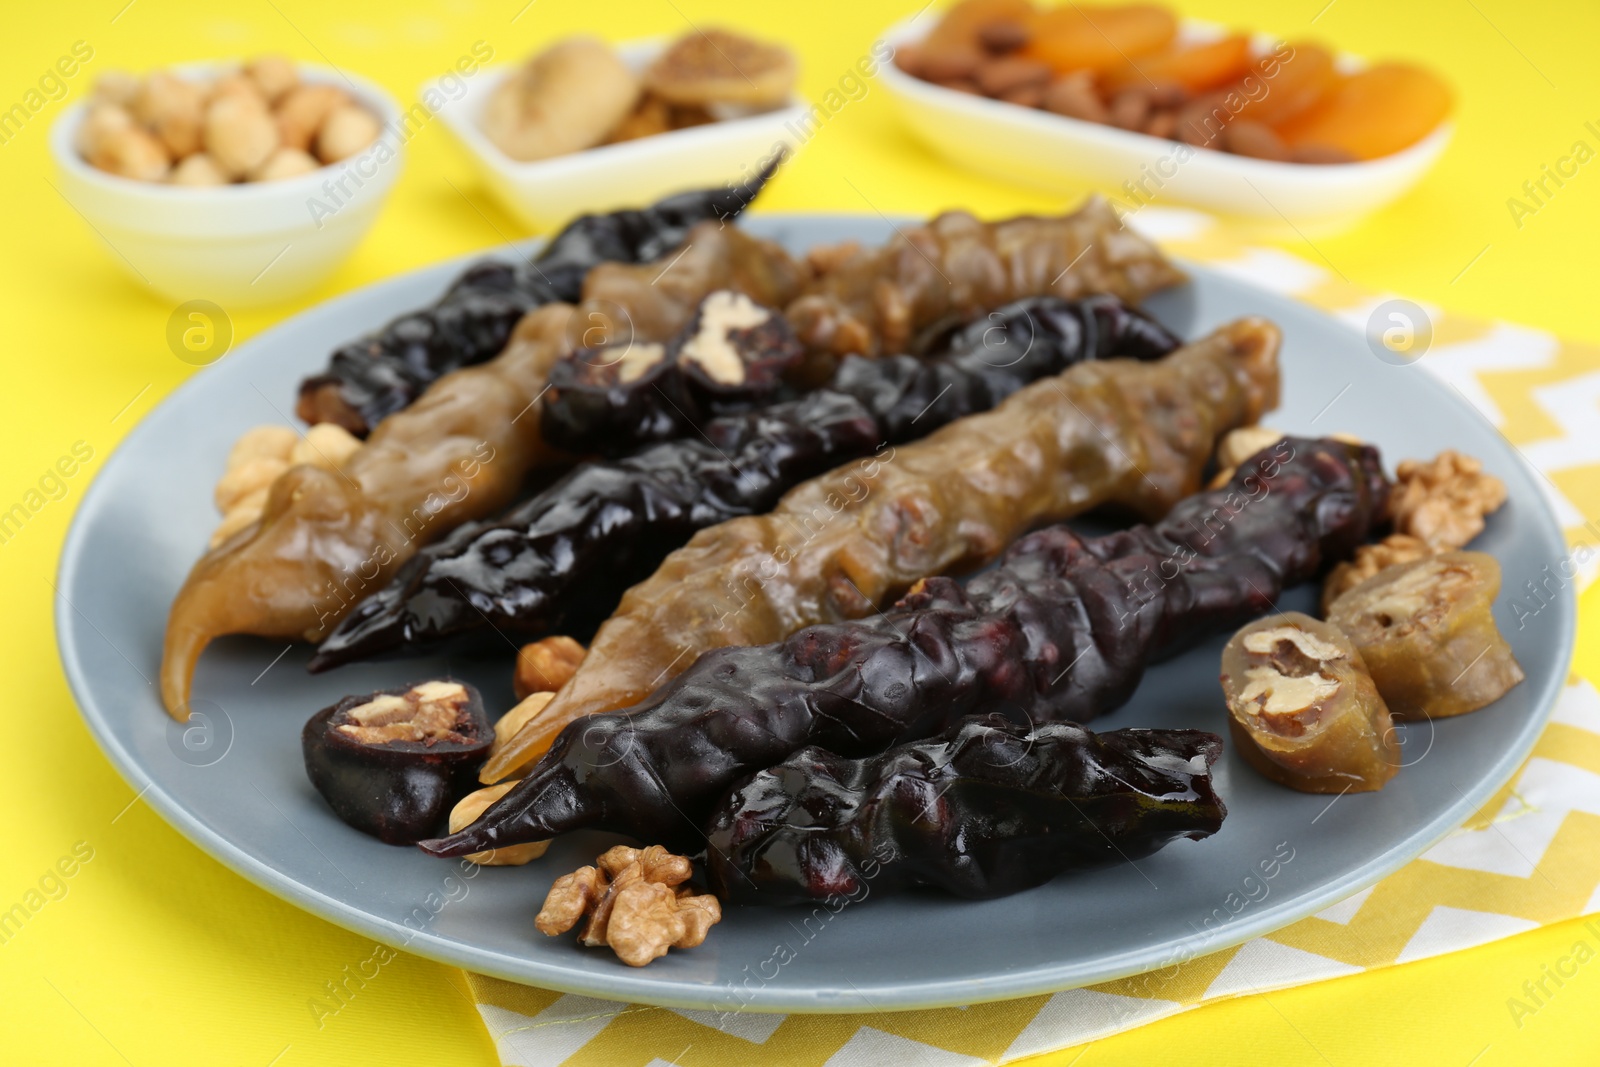 Photo of Plate with delicious churchkhelas, nuts and dried fruits on yellow background, closeup